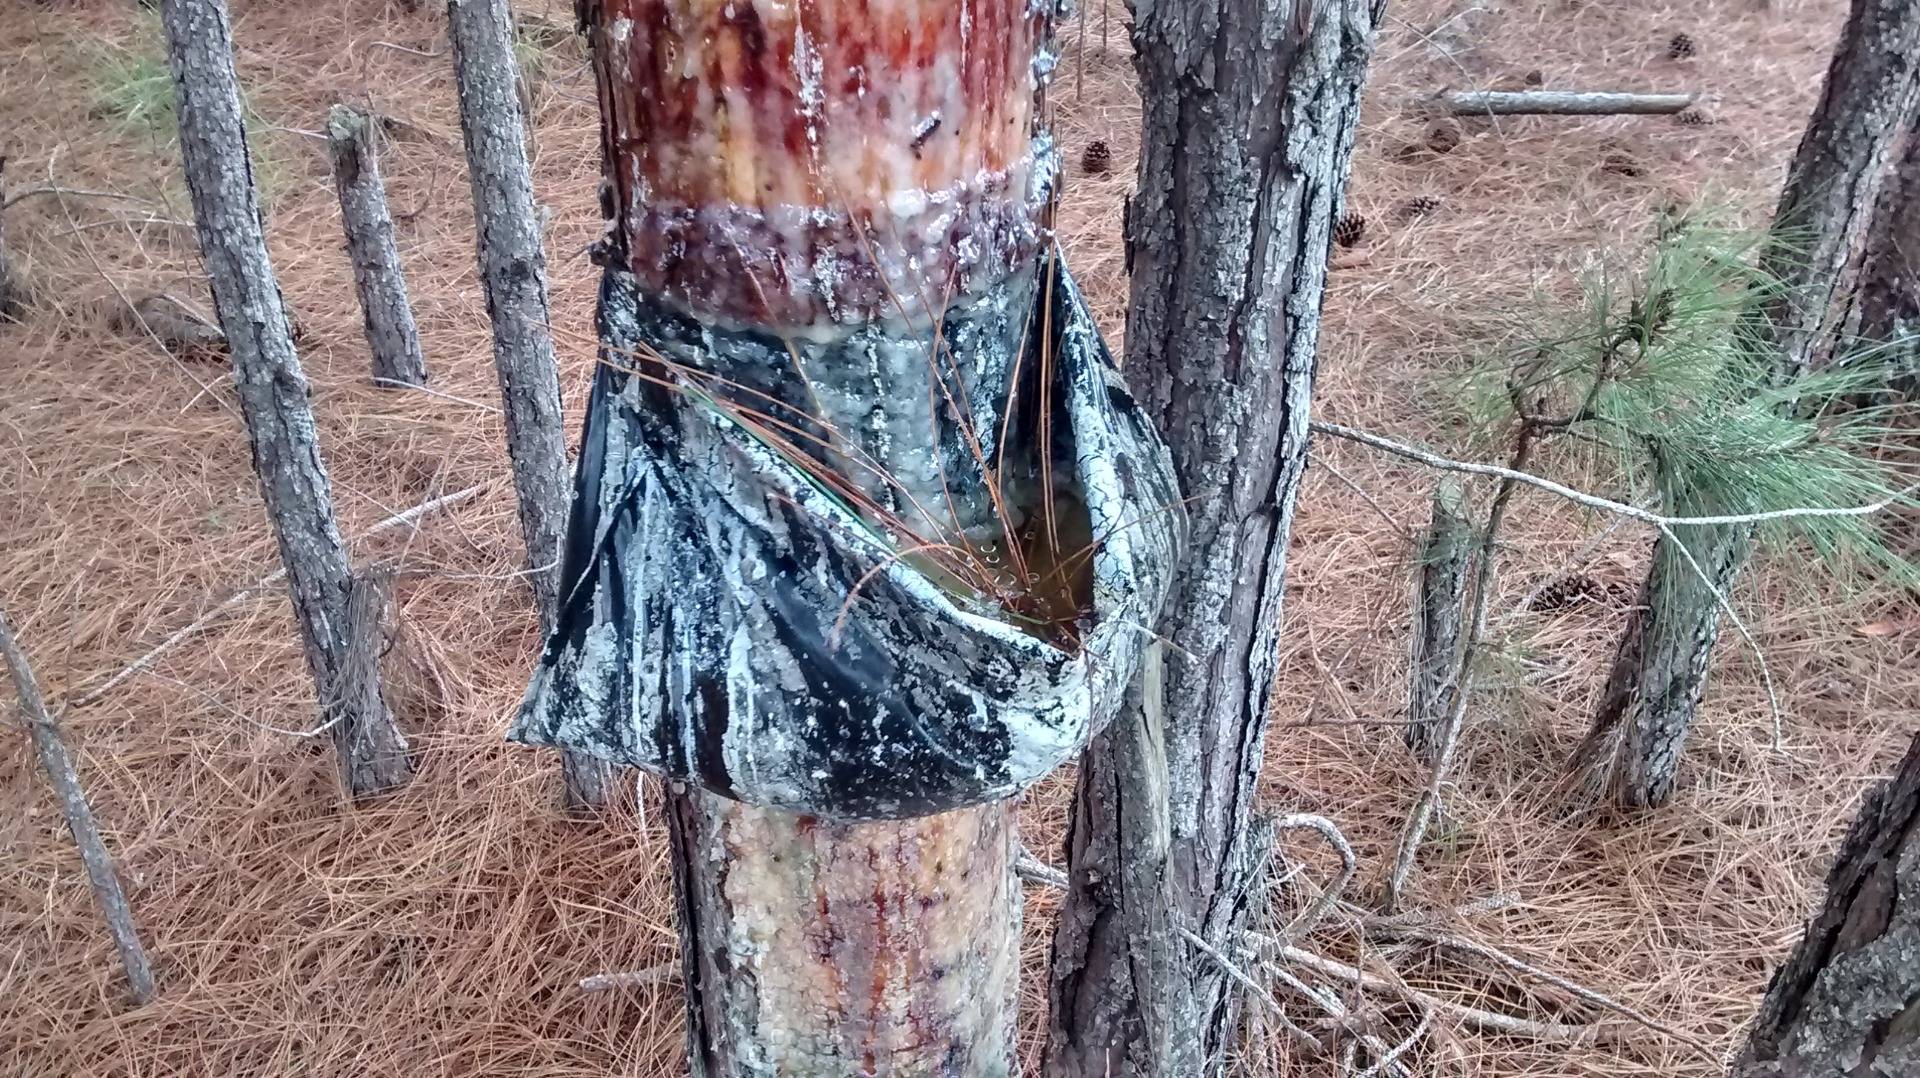 Resin extraction on a Pine tree.